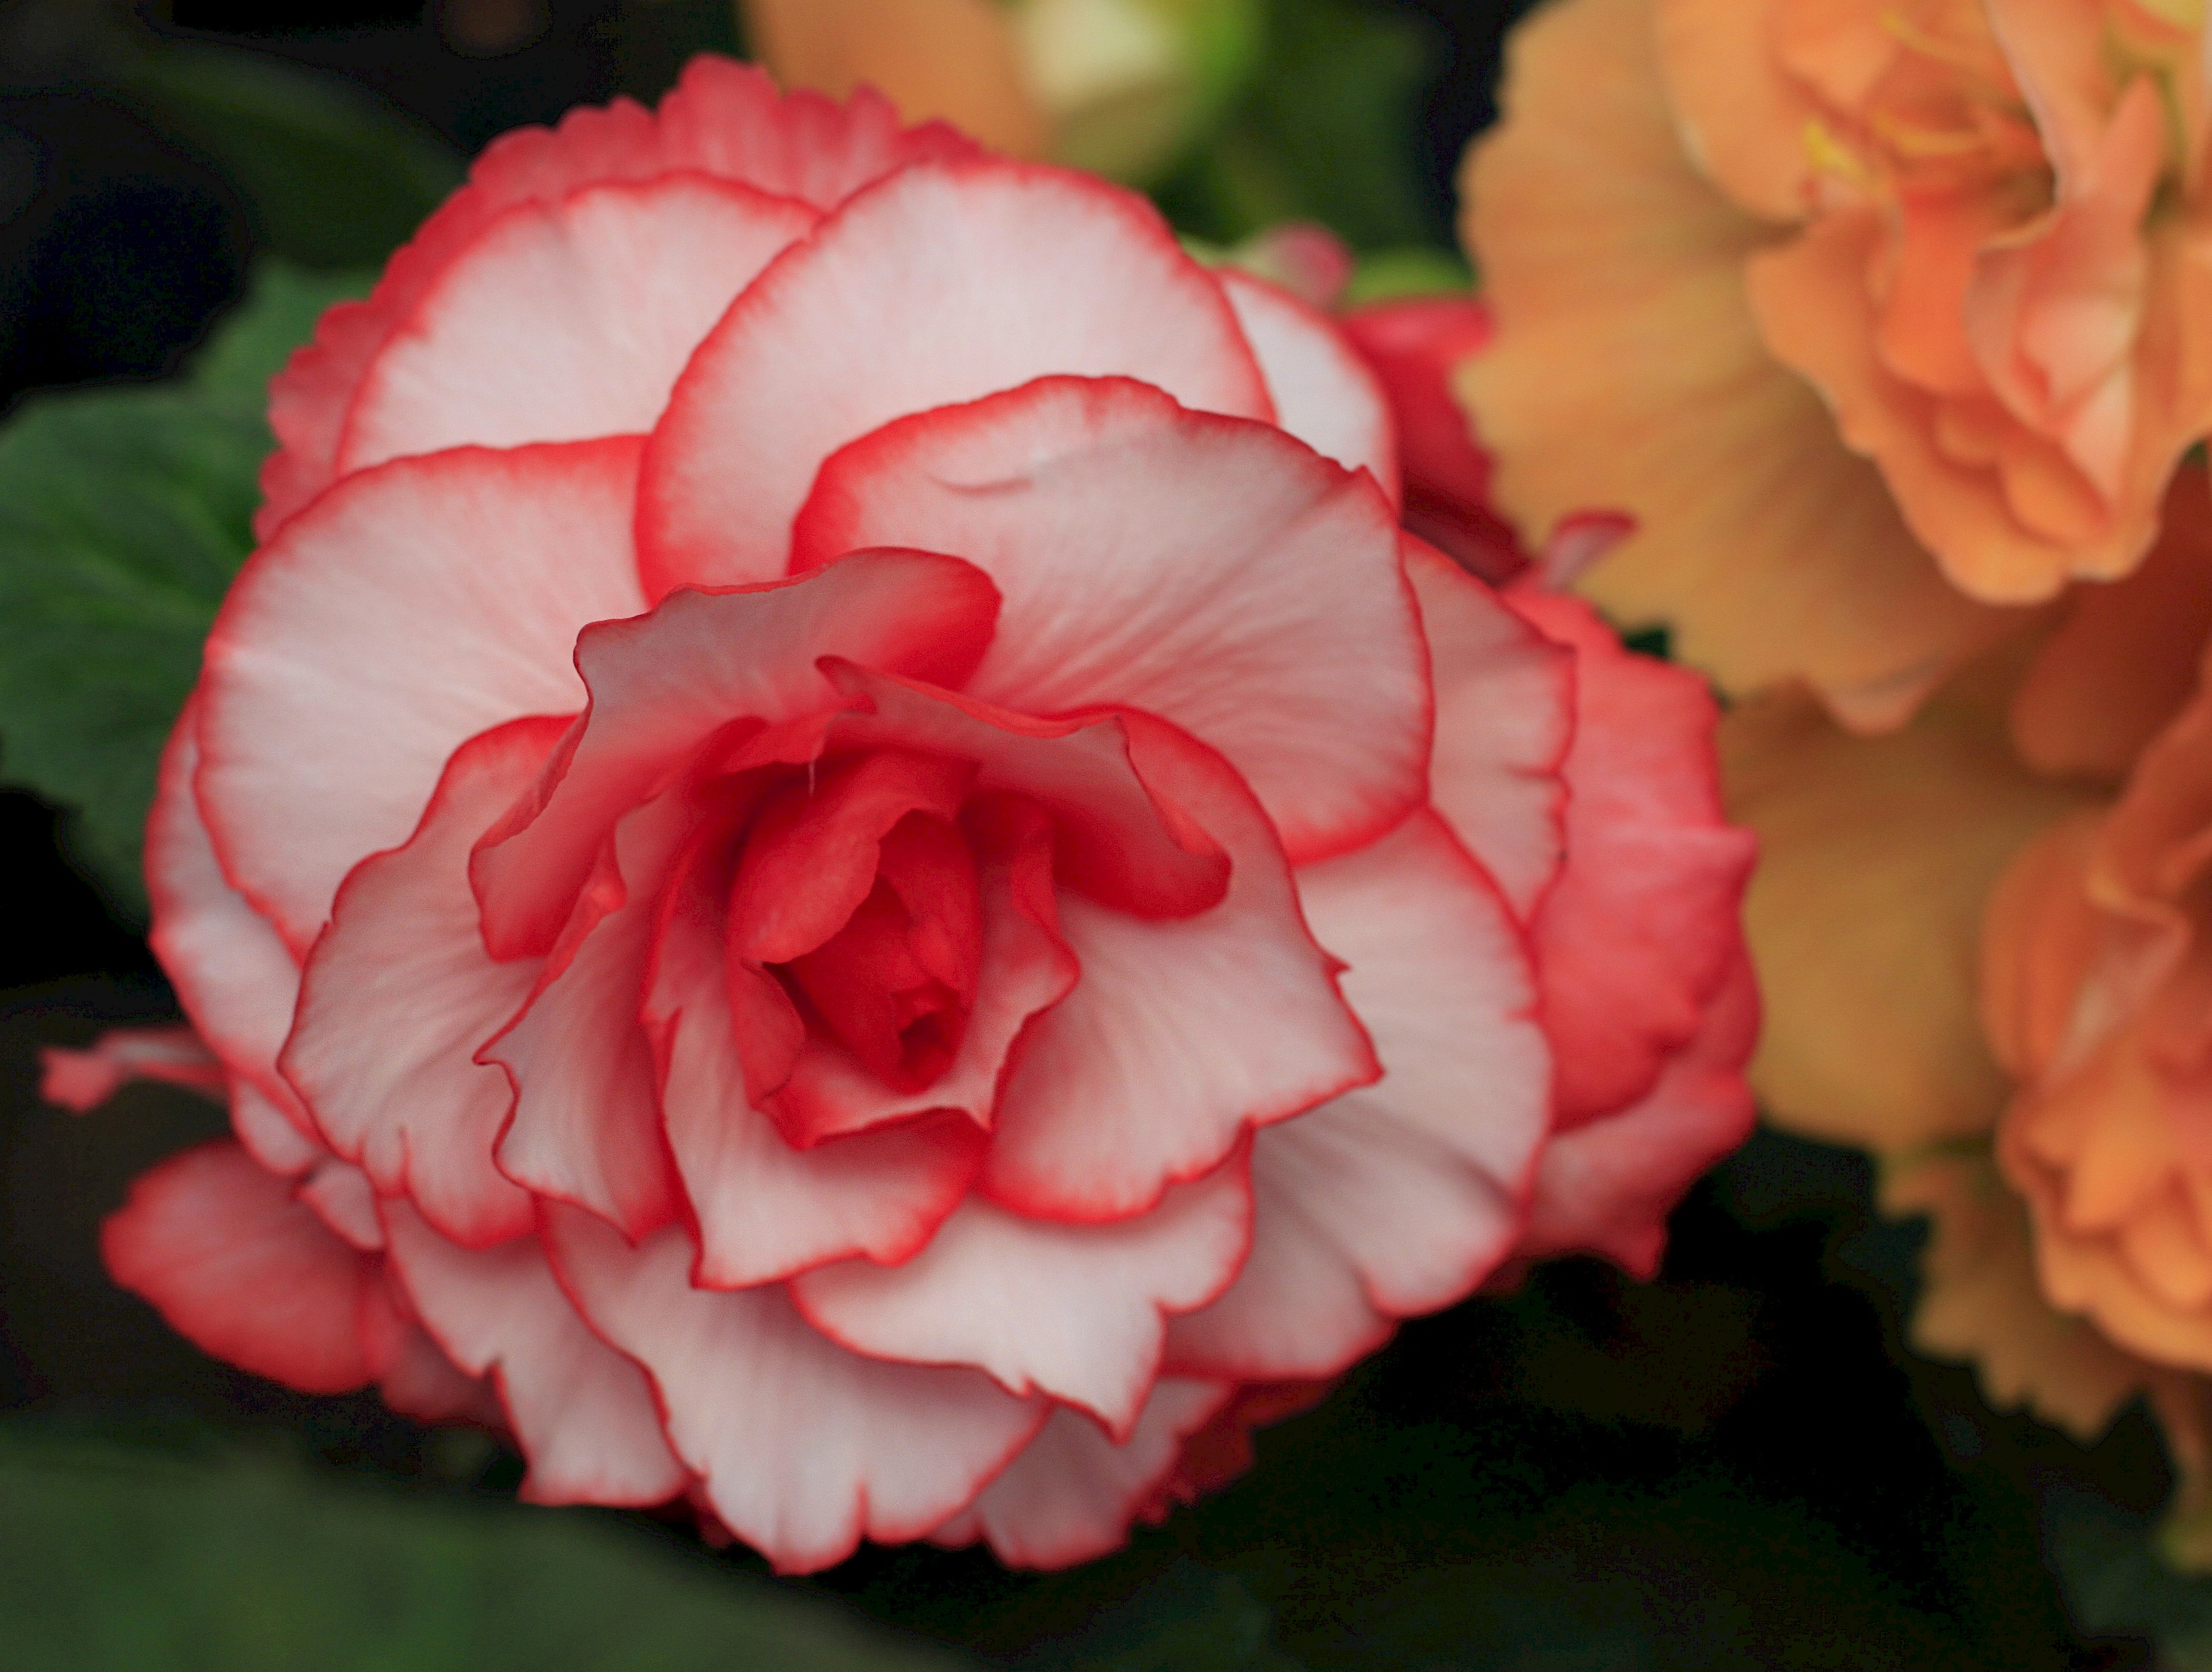 Begonia - red and white flower